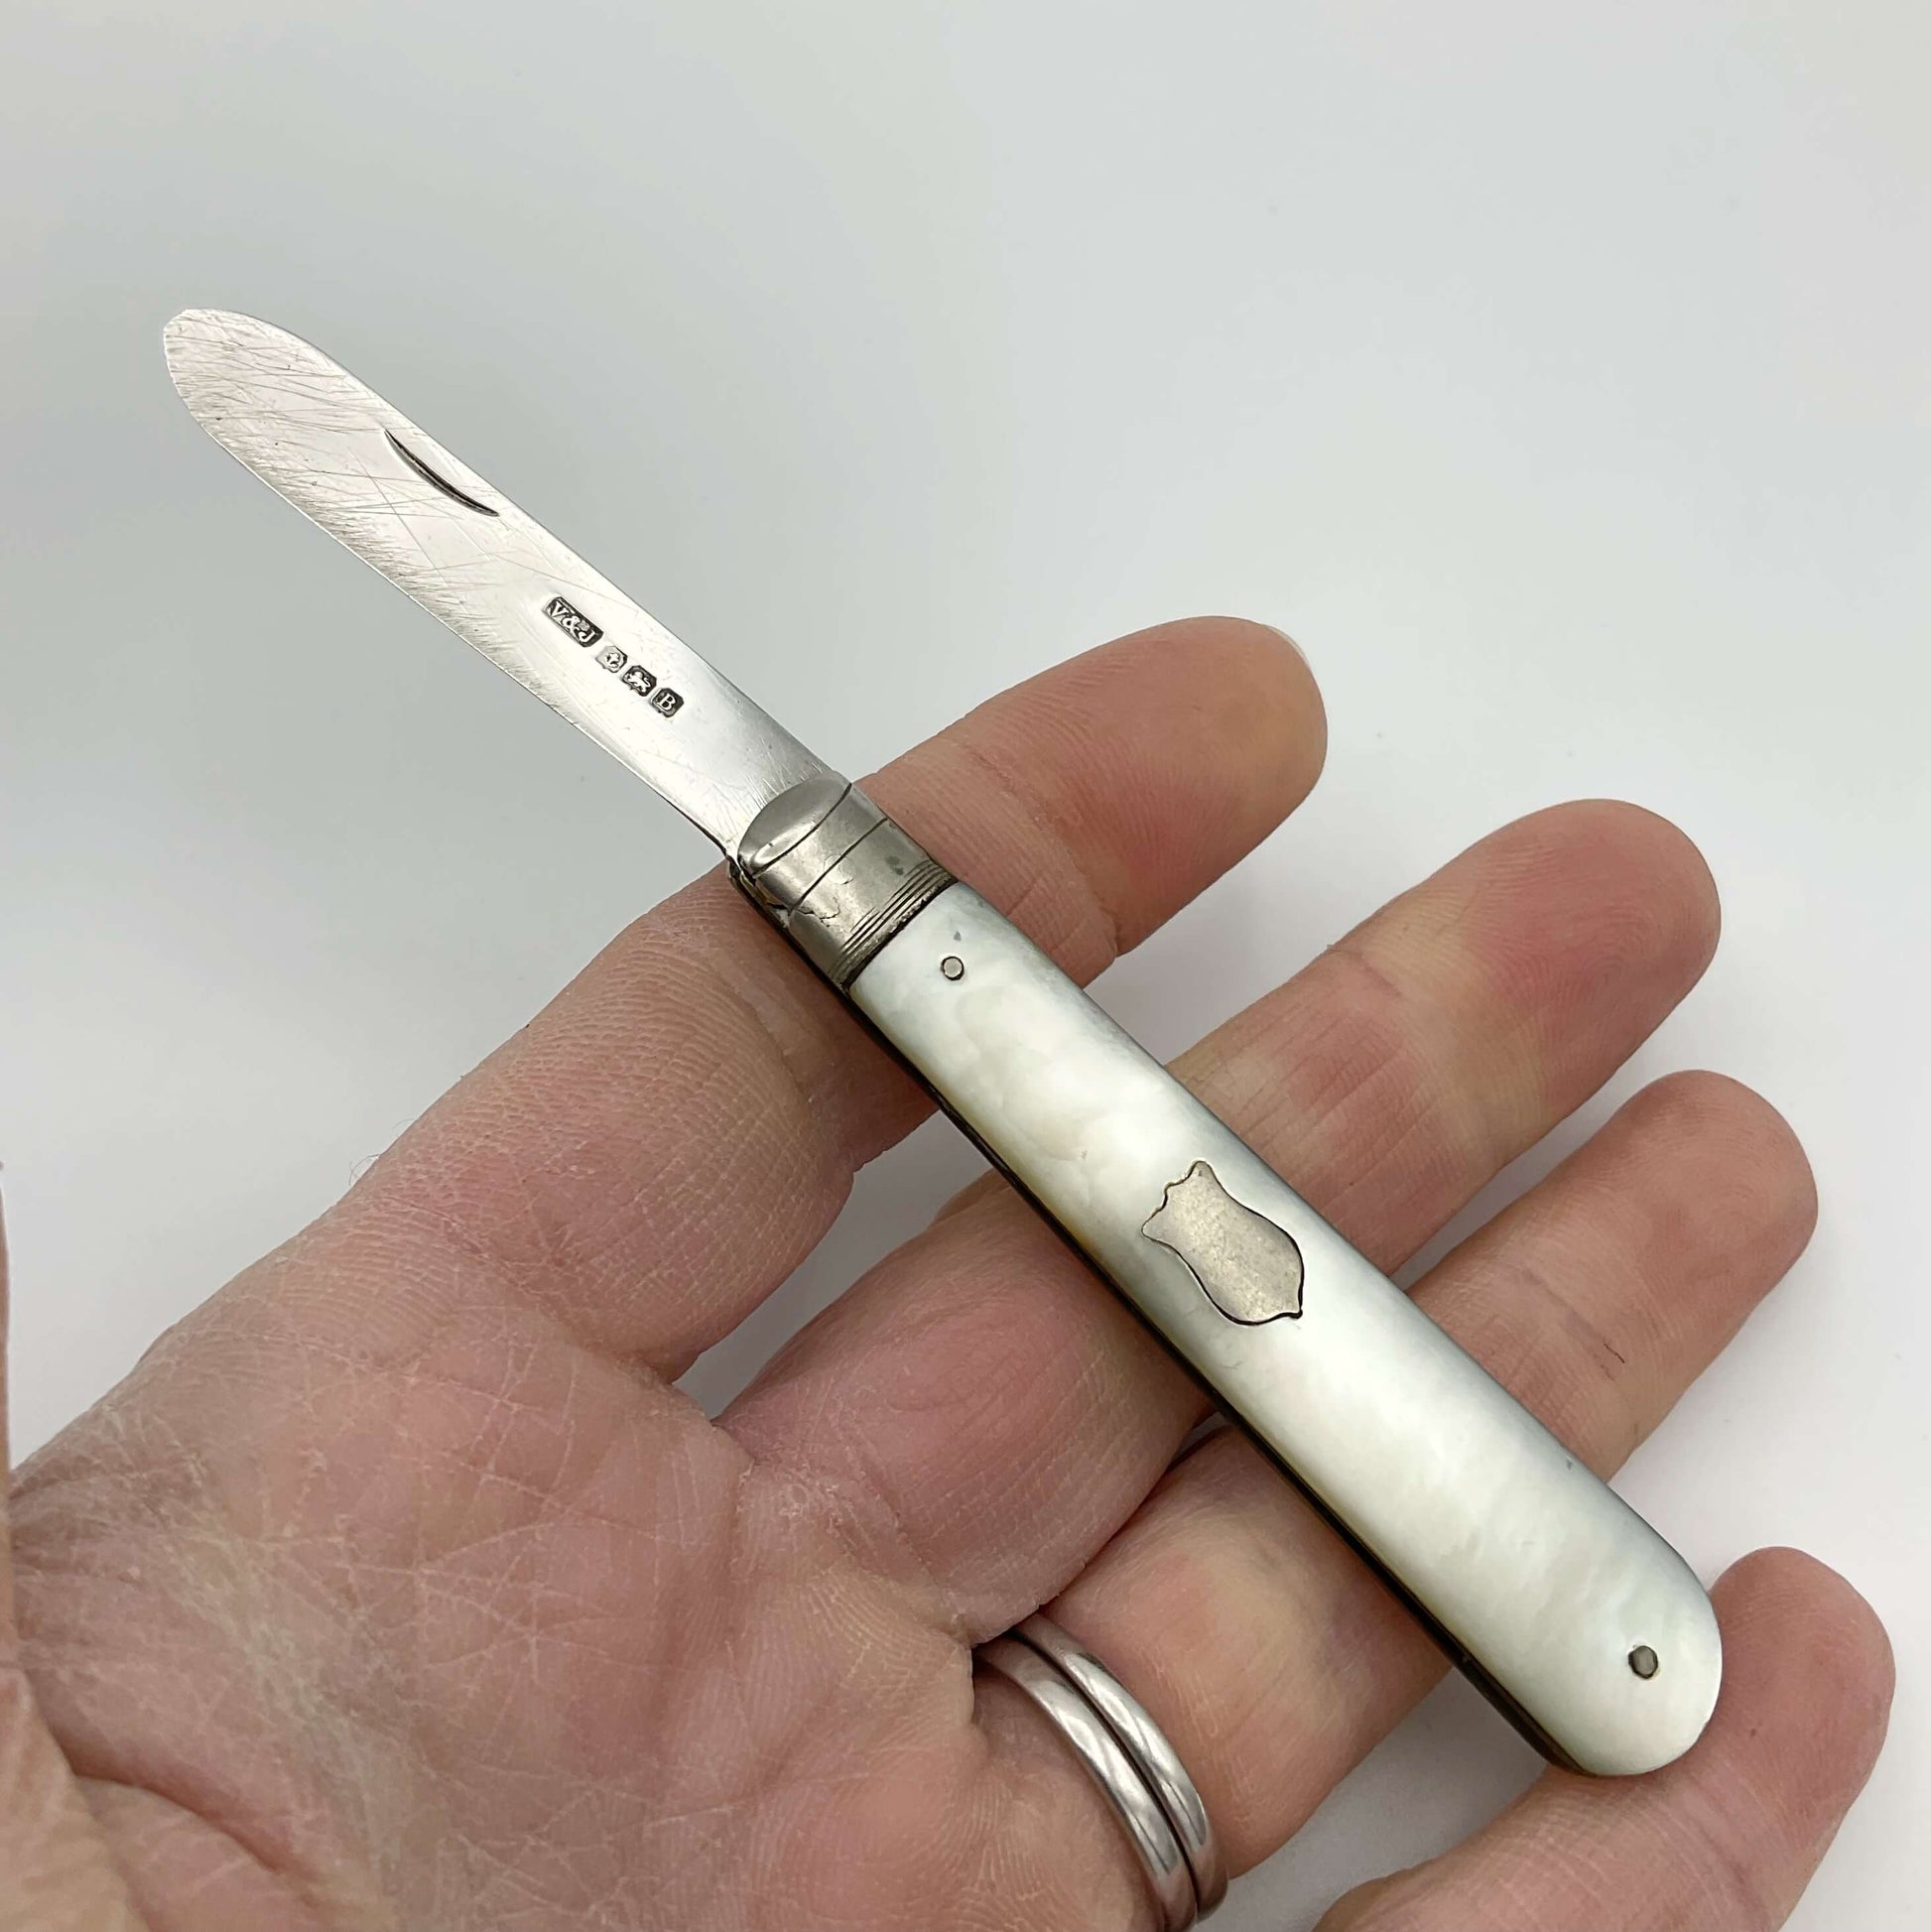 This is s folding fruit knife with a silver blade and a mother of pearl handle. It has a blank shield on one side of the handle held in a hand